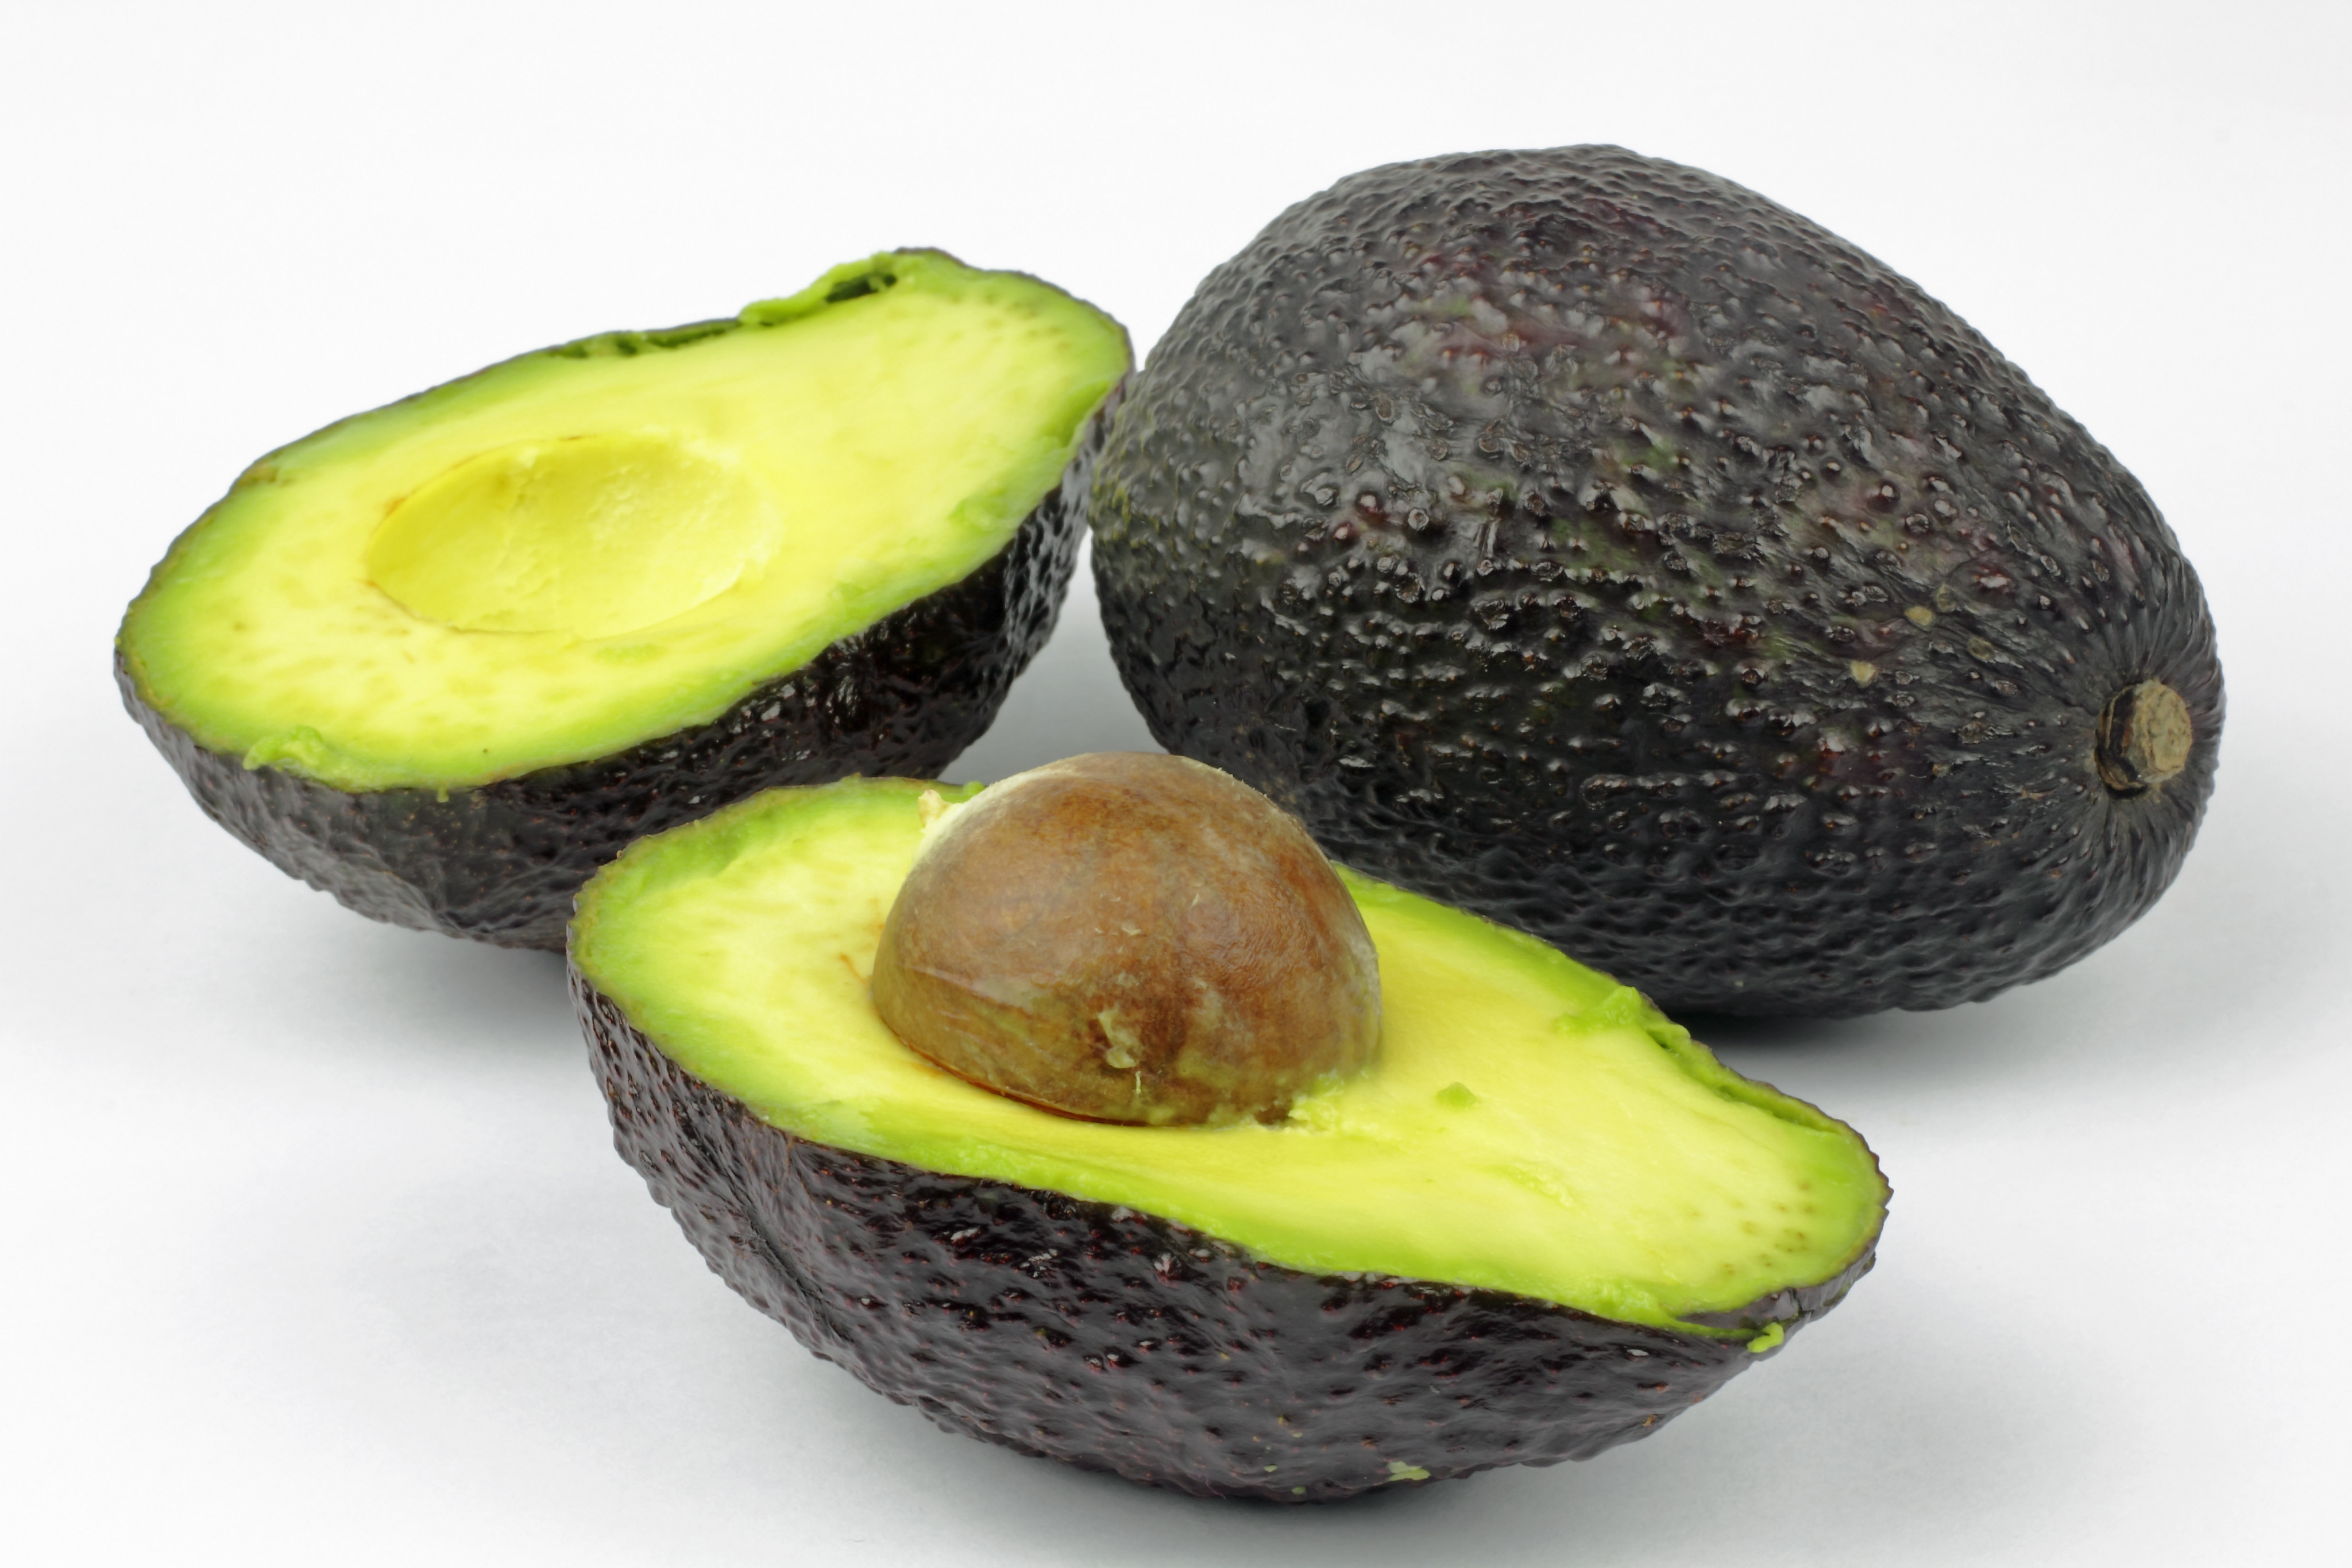 Avocados are grown around the world but their etymological origins are with Central America and the Aztecs. Photo: Shutterstock